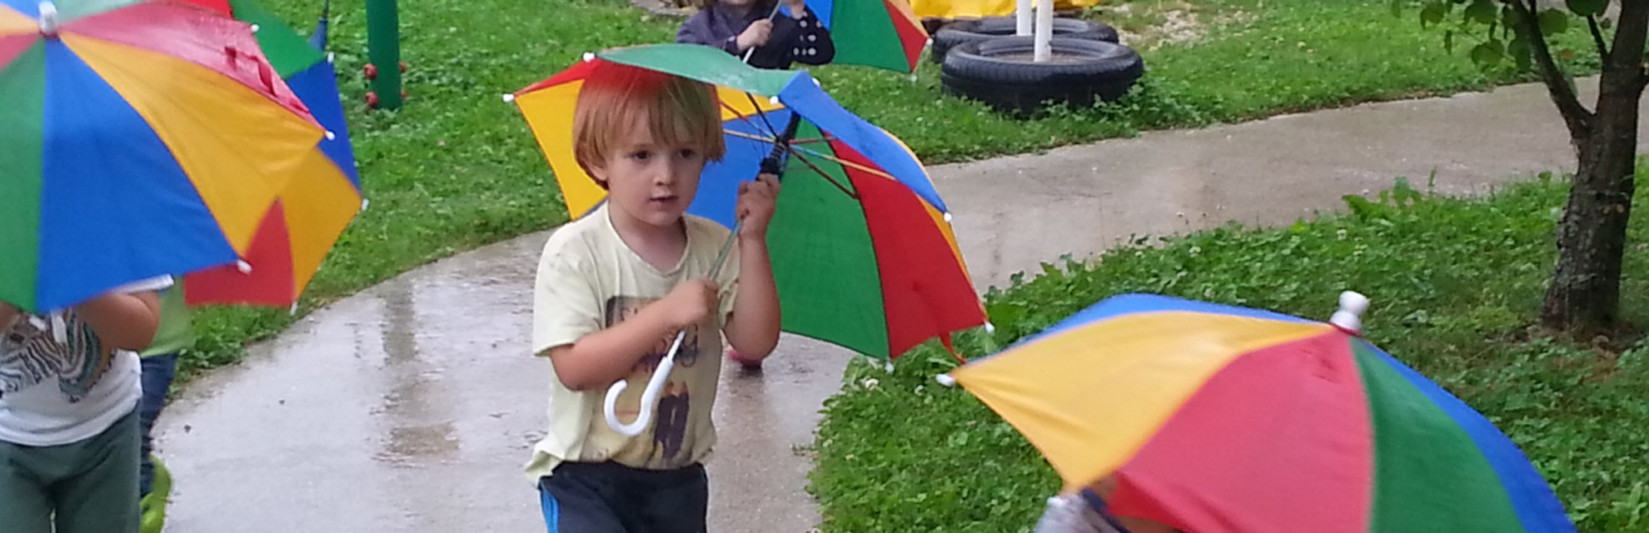 <div class="naslov"> <h1>Who is afraid of raindrops?
</h1> <p class="p-slid">We are not! Singing and dancing with our colorful umbrellas. </p> </div>